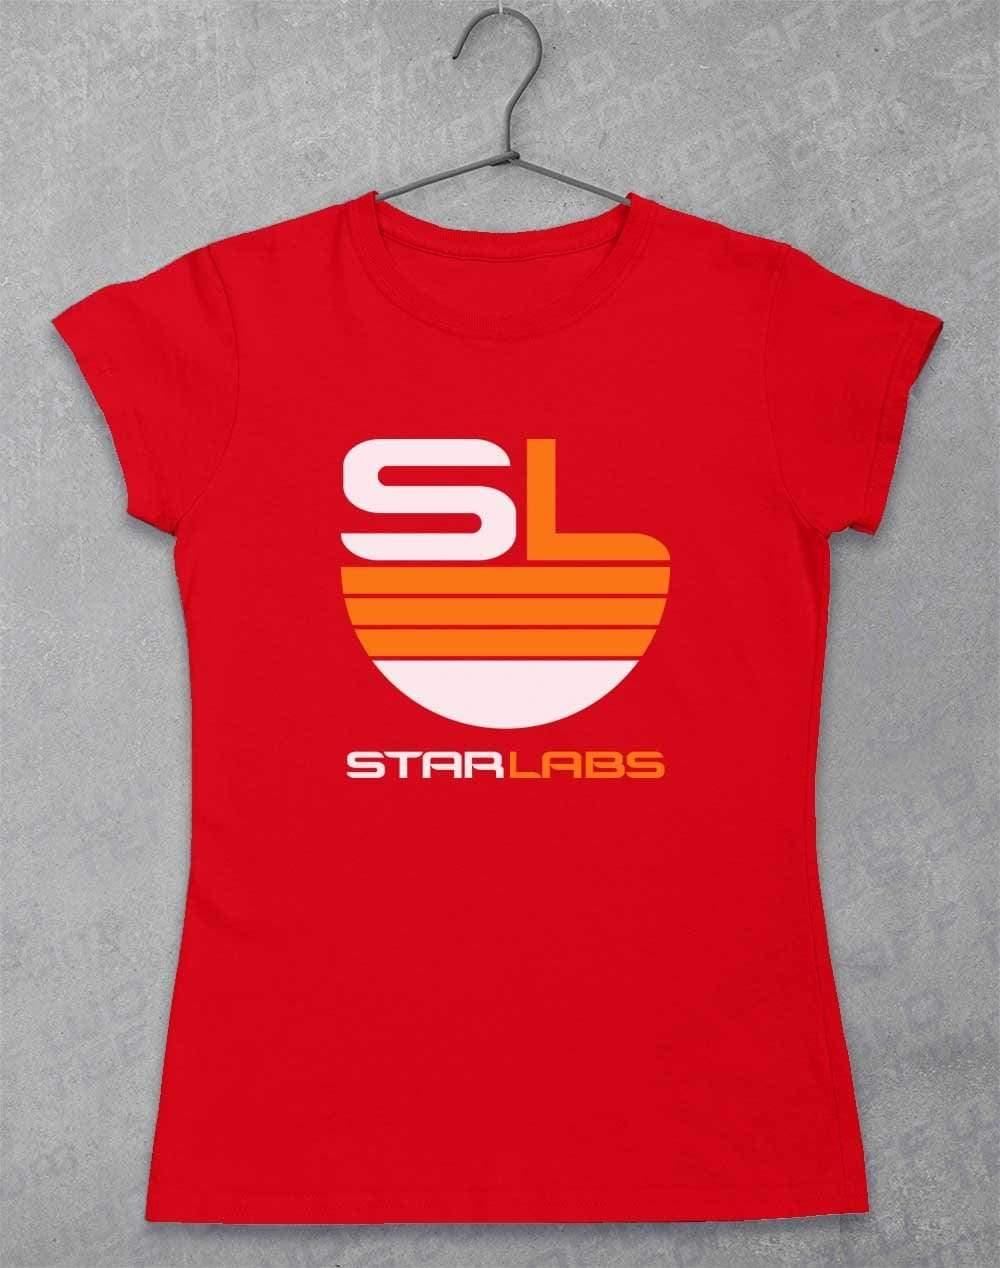 Star Labs Logo Womens T-Shirt 8-10 / Red  - Off World Tees